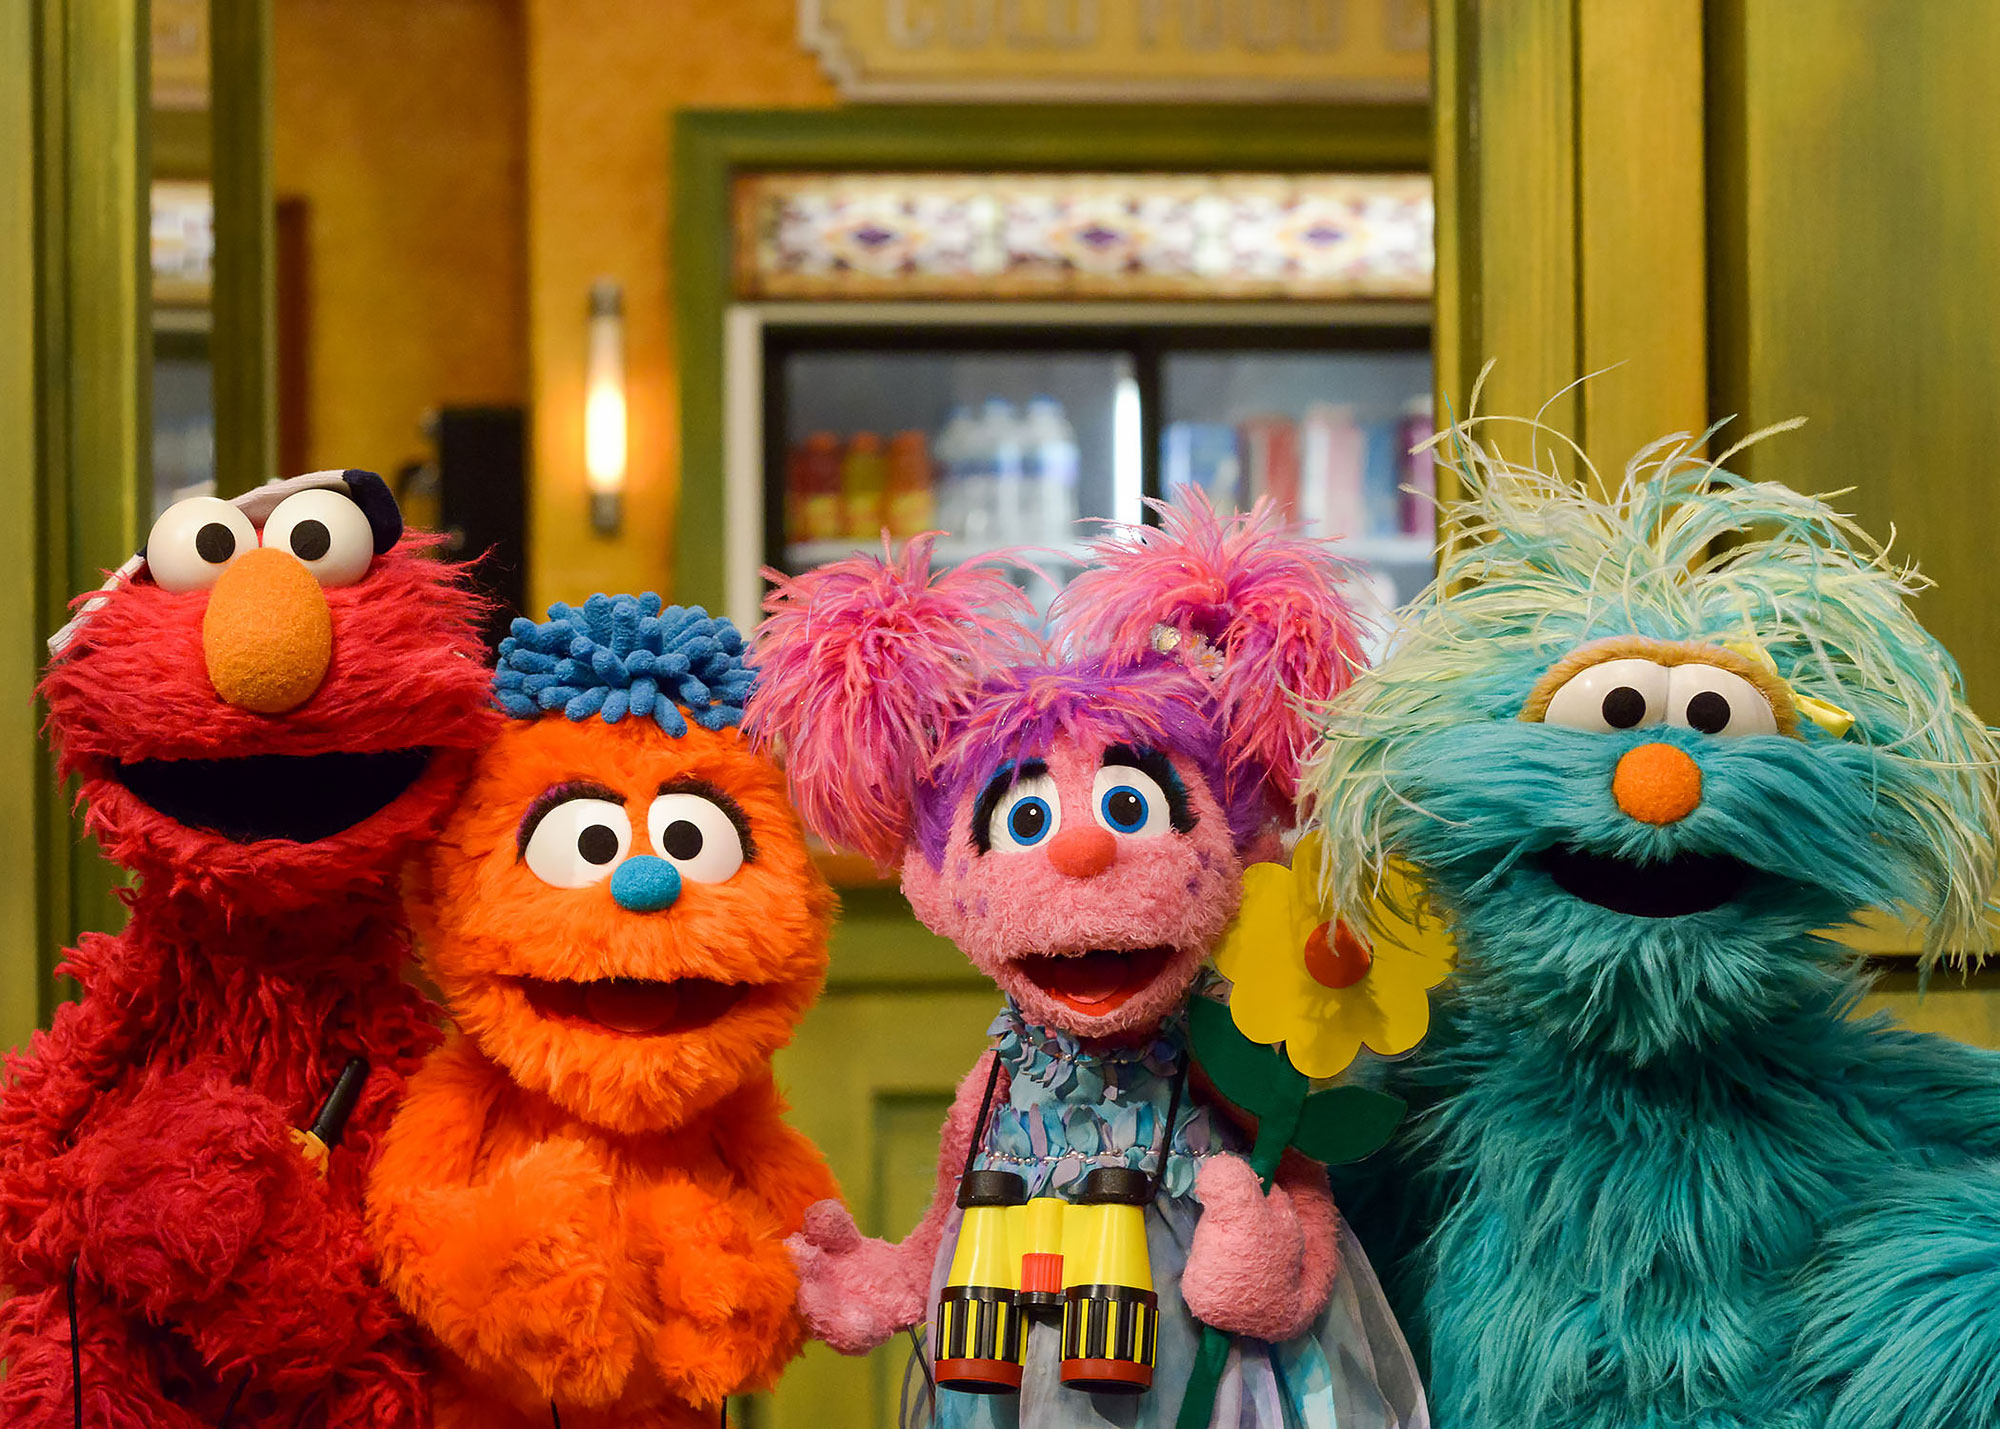 Sesame Street's New Character Explains Blended Families | PEOPLE.com